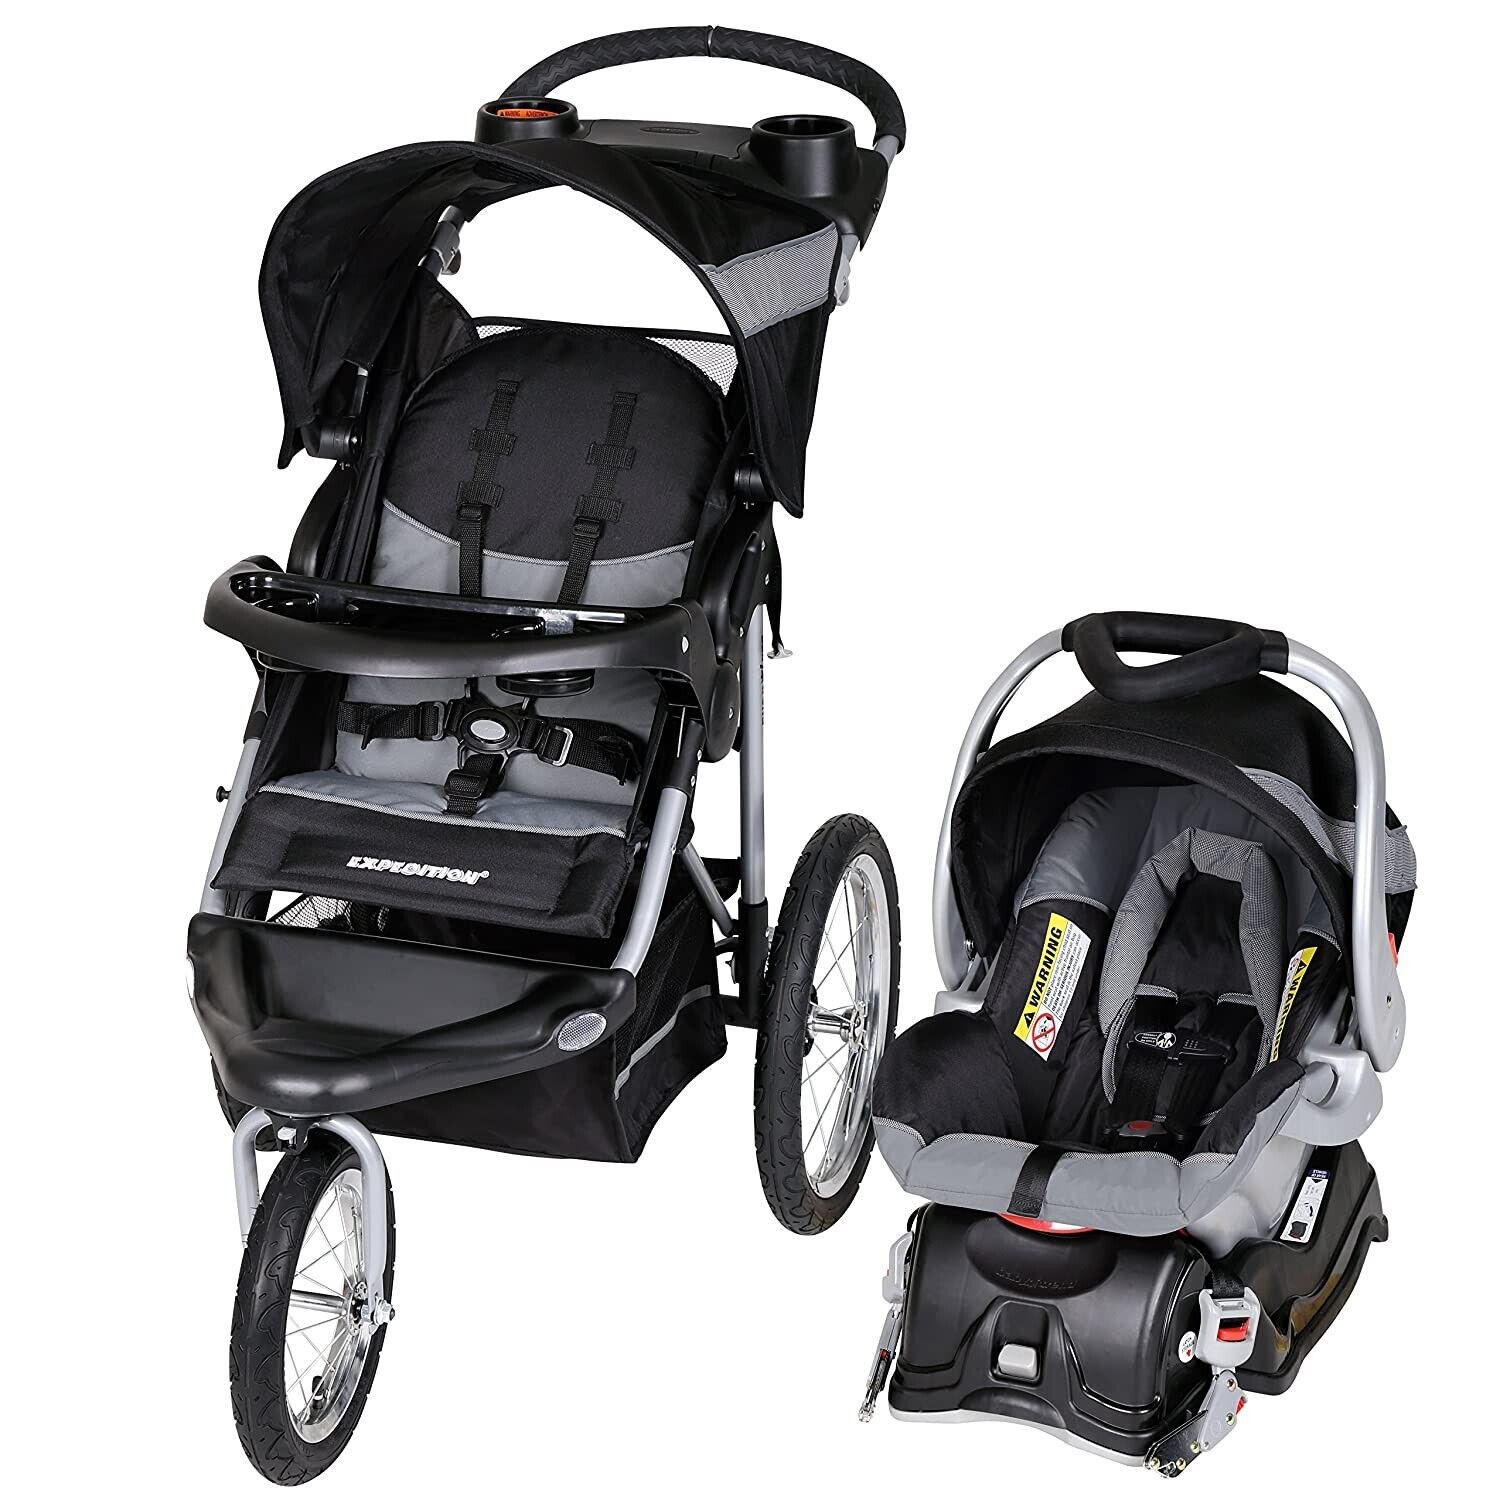 Baby Trend Expedition Jogger Stroller Travel System W/ Car Seat Millennium White